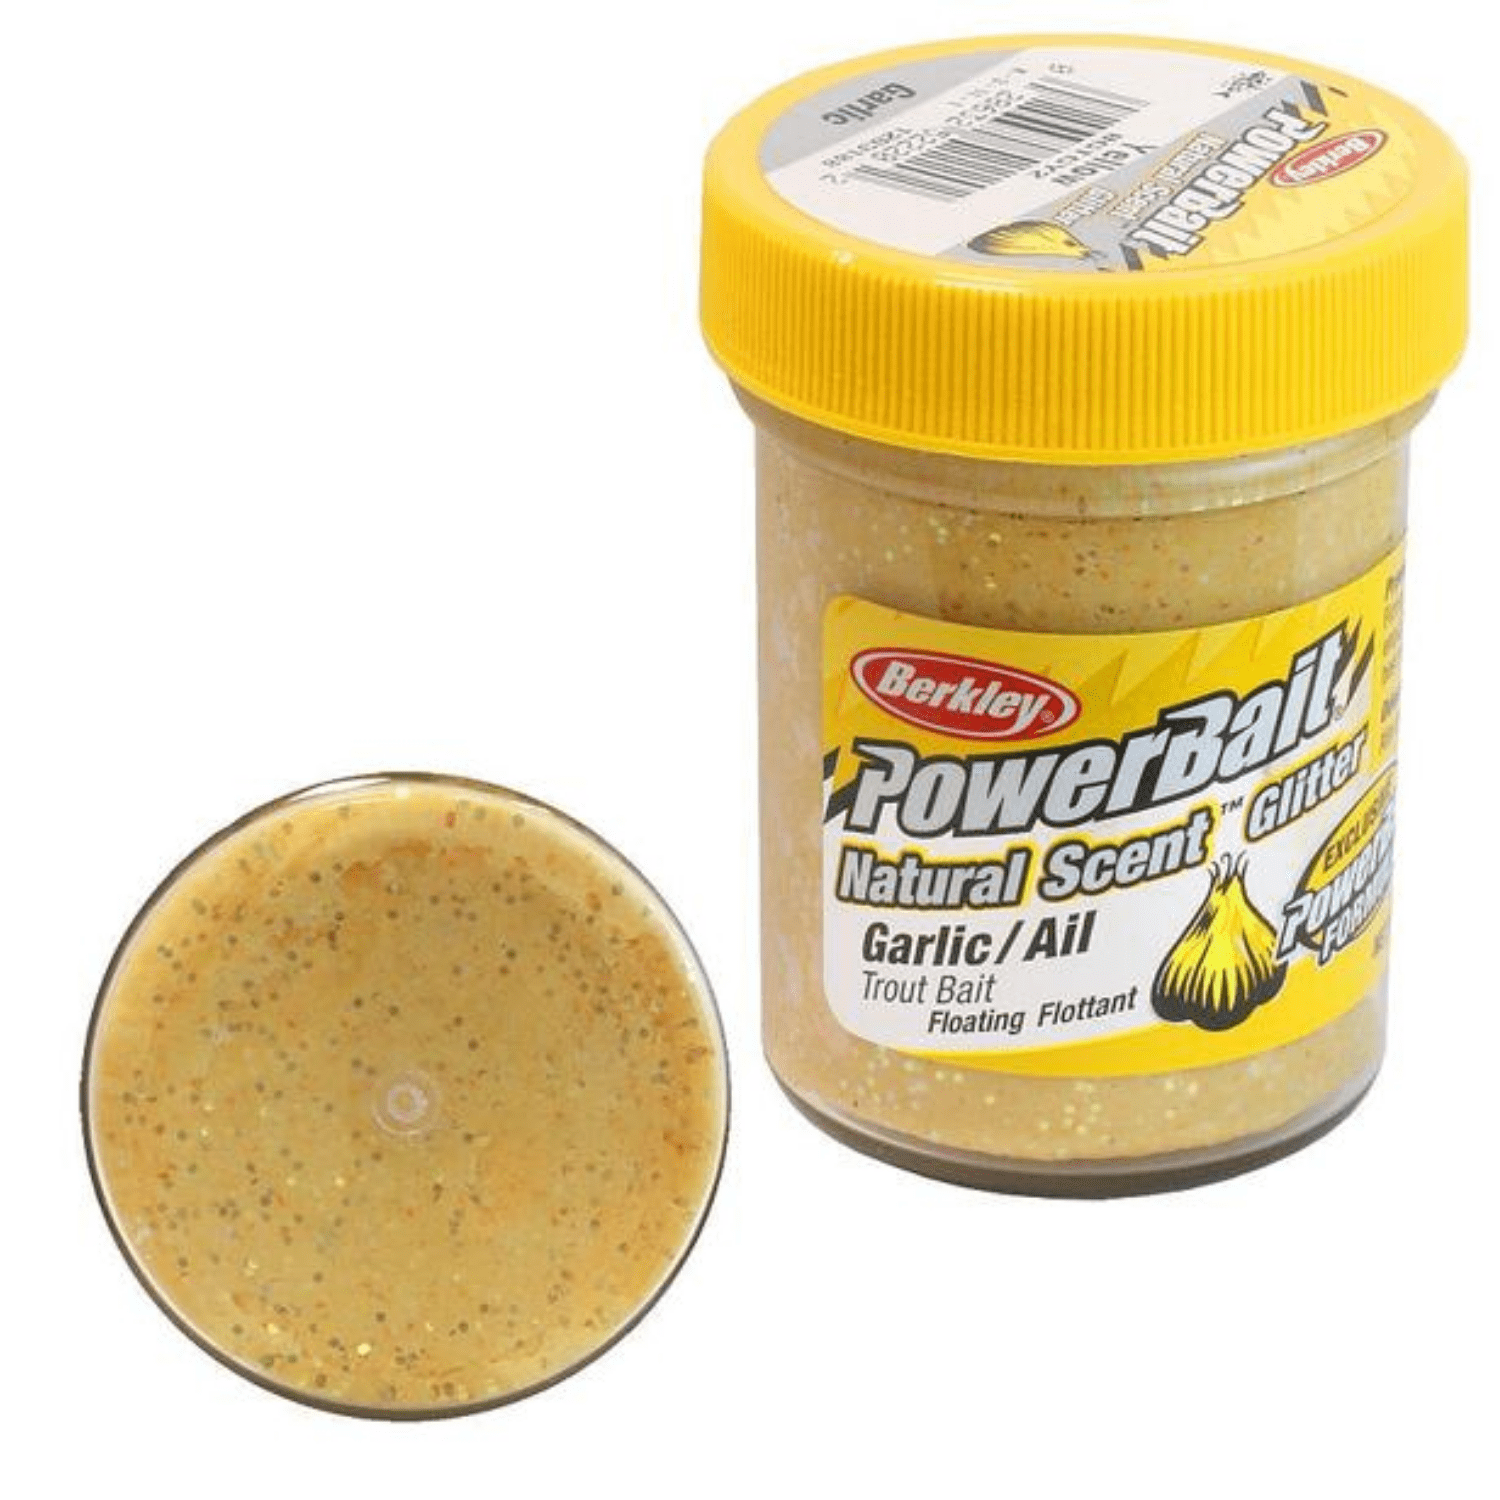 PowerBait Natural Glitter Trout Dough Fishing Bait Garlic/Ail, 1.8 oz  Moldable & Easy to Use Infused with Glitter to Reflect Light & Increase